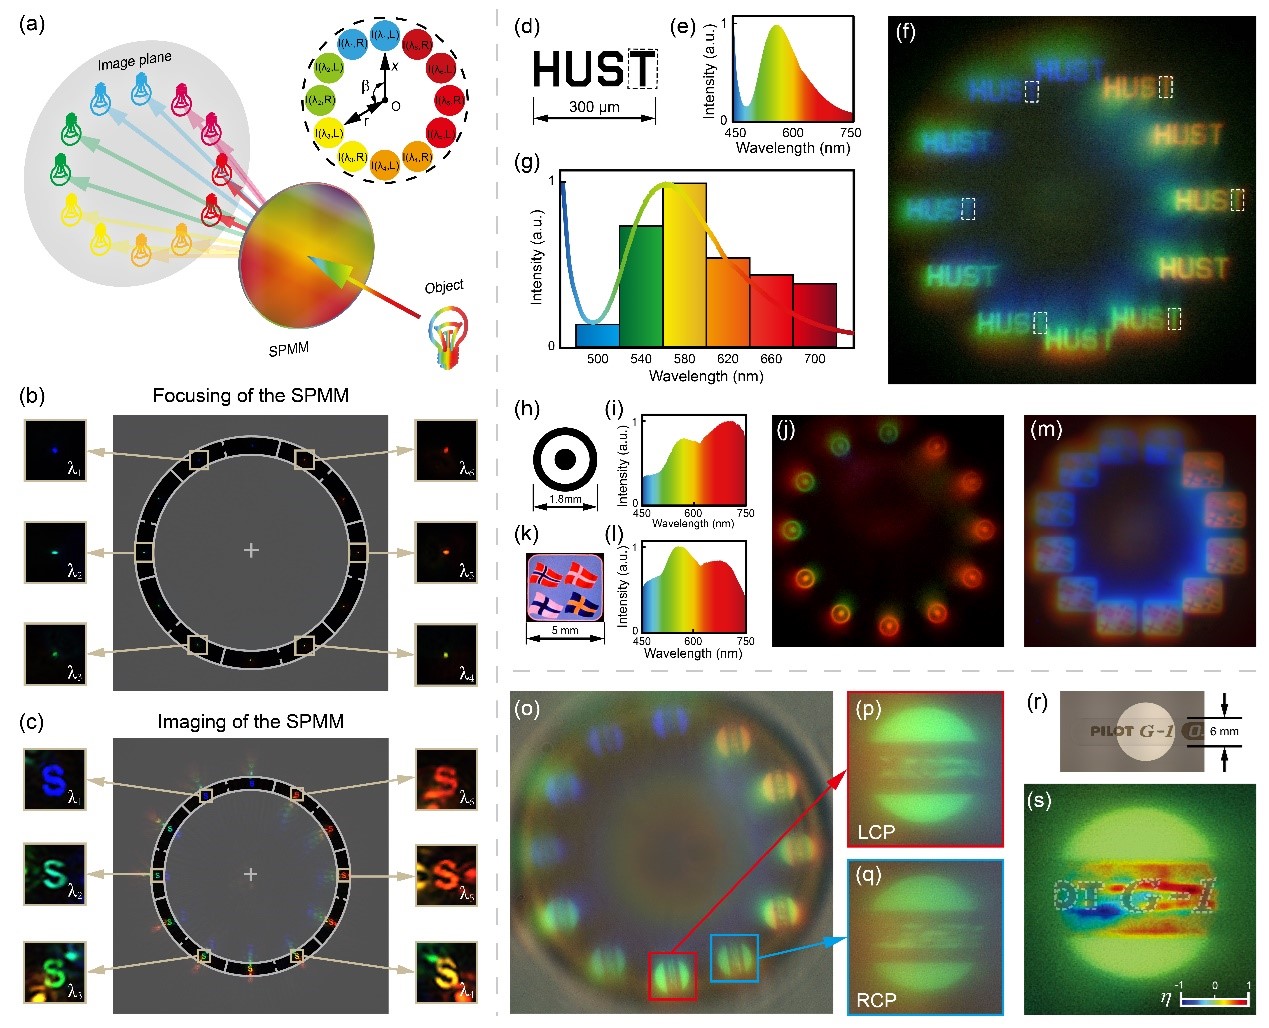 Multispectral and polarized imaging uses SPMM with an ordinary white light beam